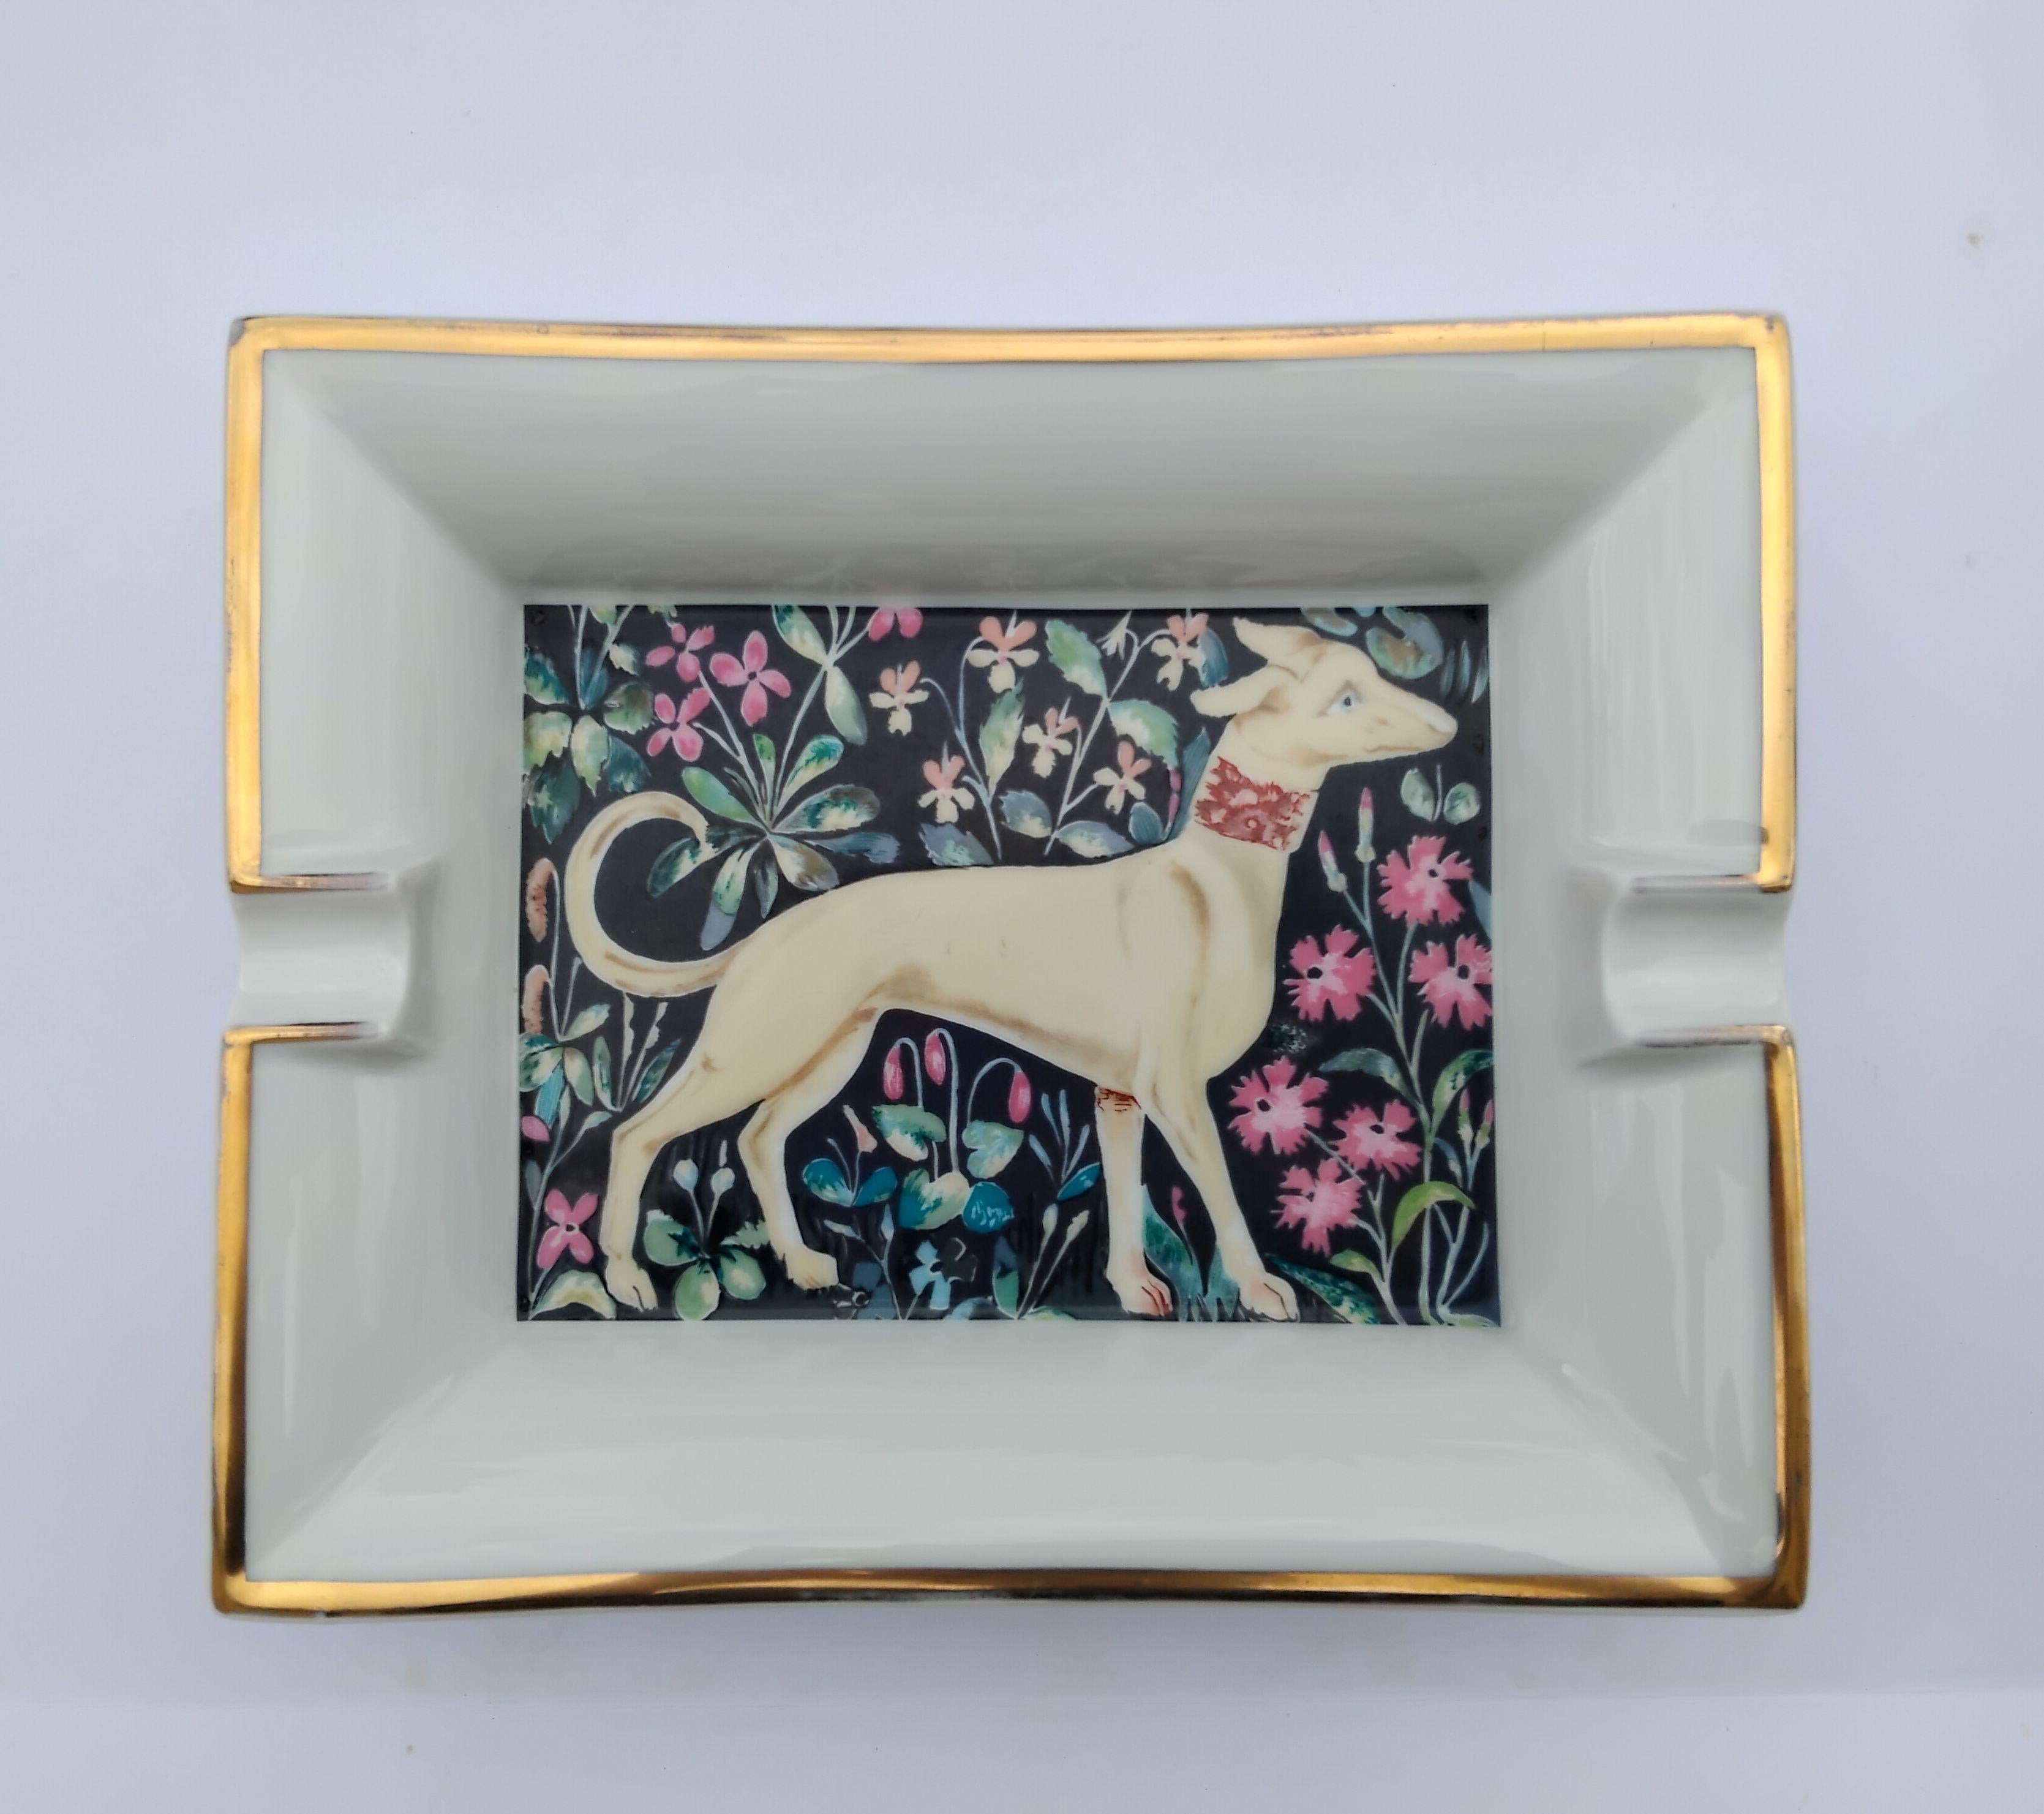 Rare and Beautiful Authentic Hermès Ashtray

Print: greyhound dog in a flower decor

Made in France

Vintage item

Made of porcelain, edges gilded with fine gold, bottom covered with brown leather

Colorways: White, Beige, Blue, Pink,